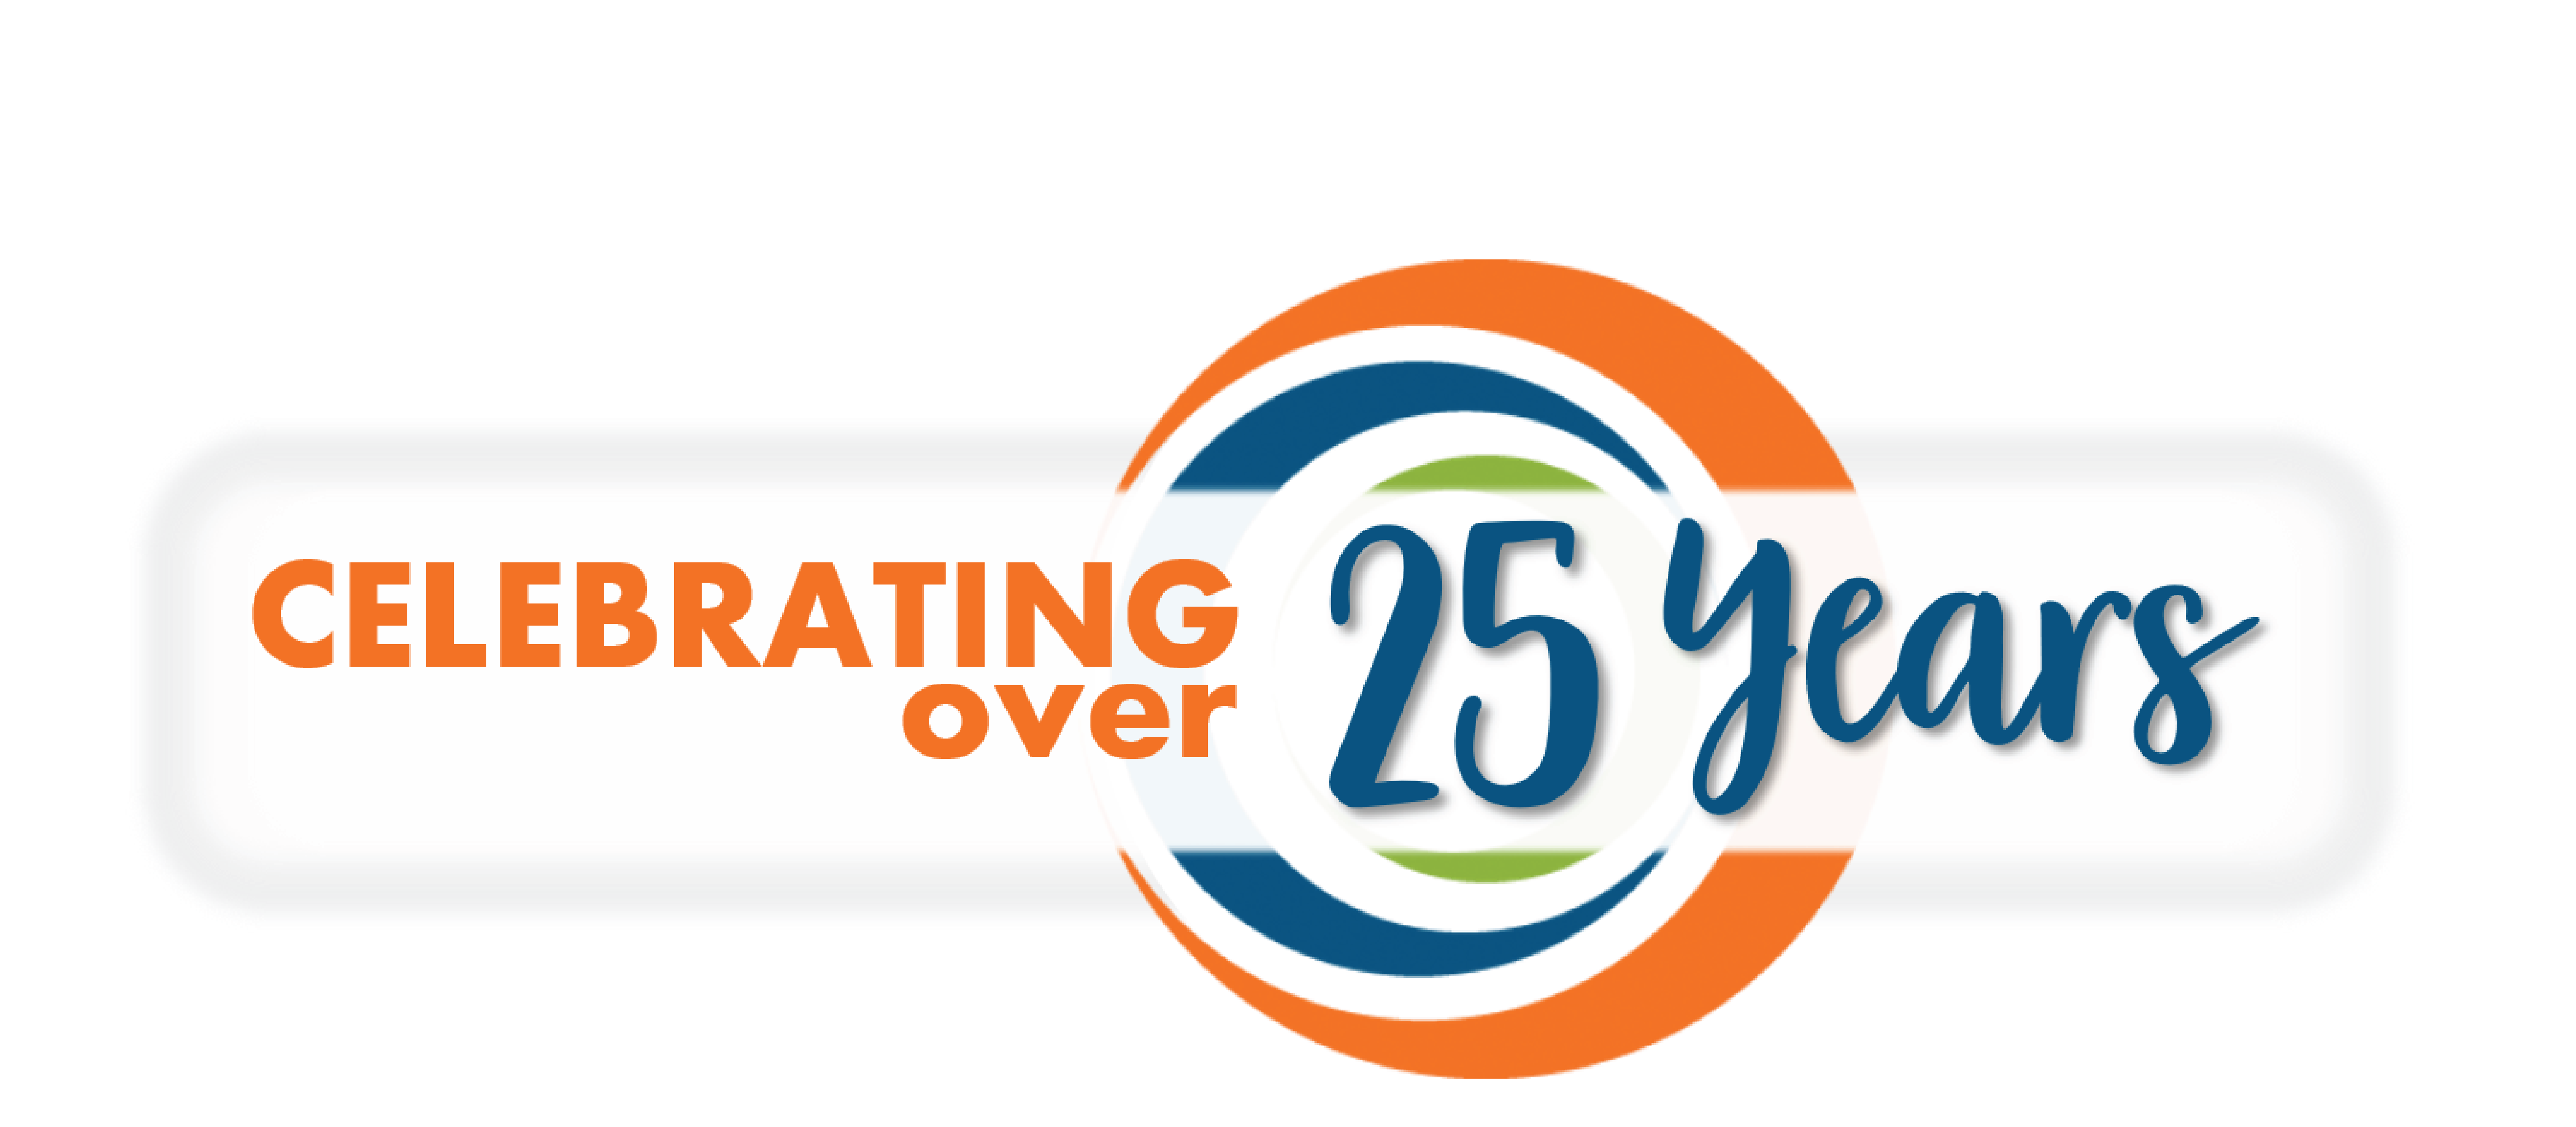 Celebrating over 25 years@4x